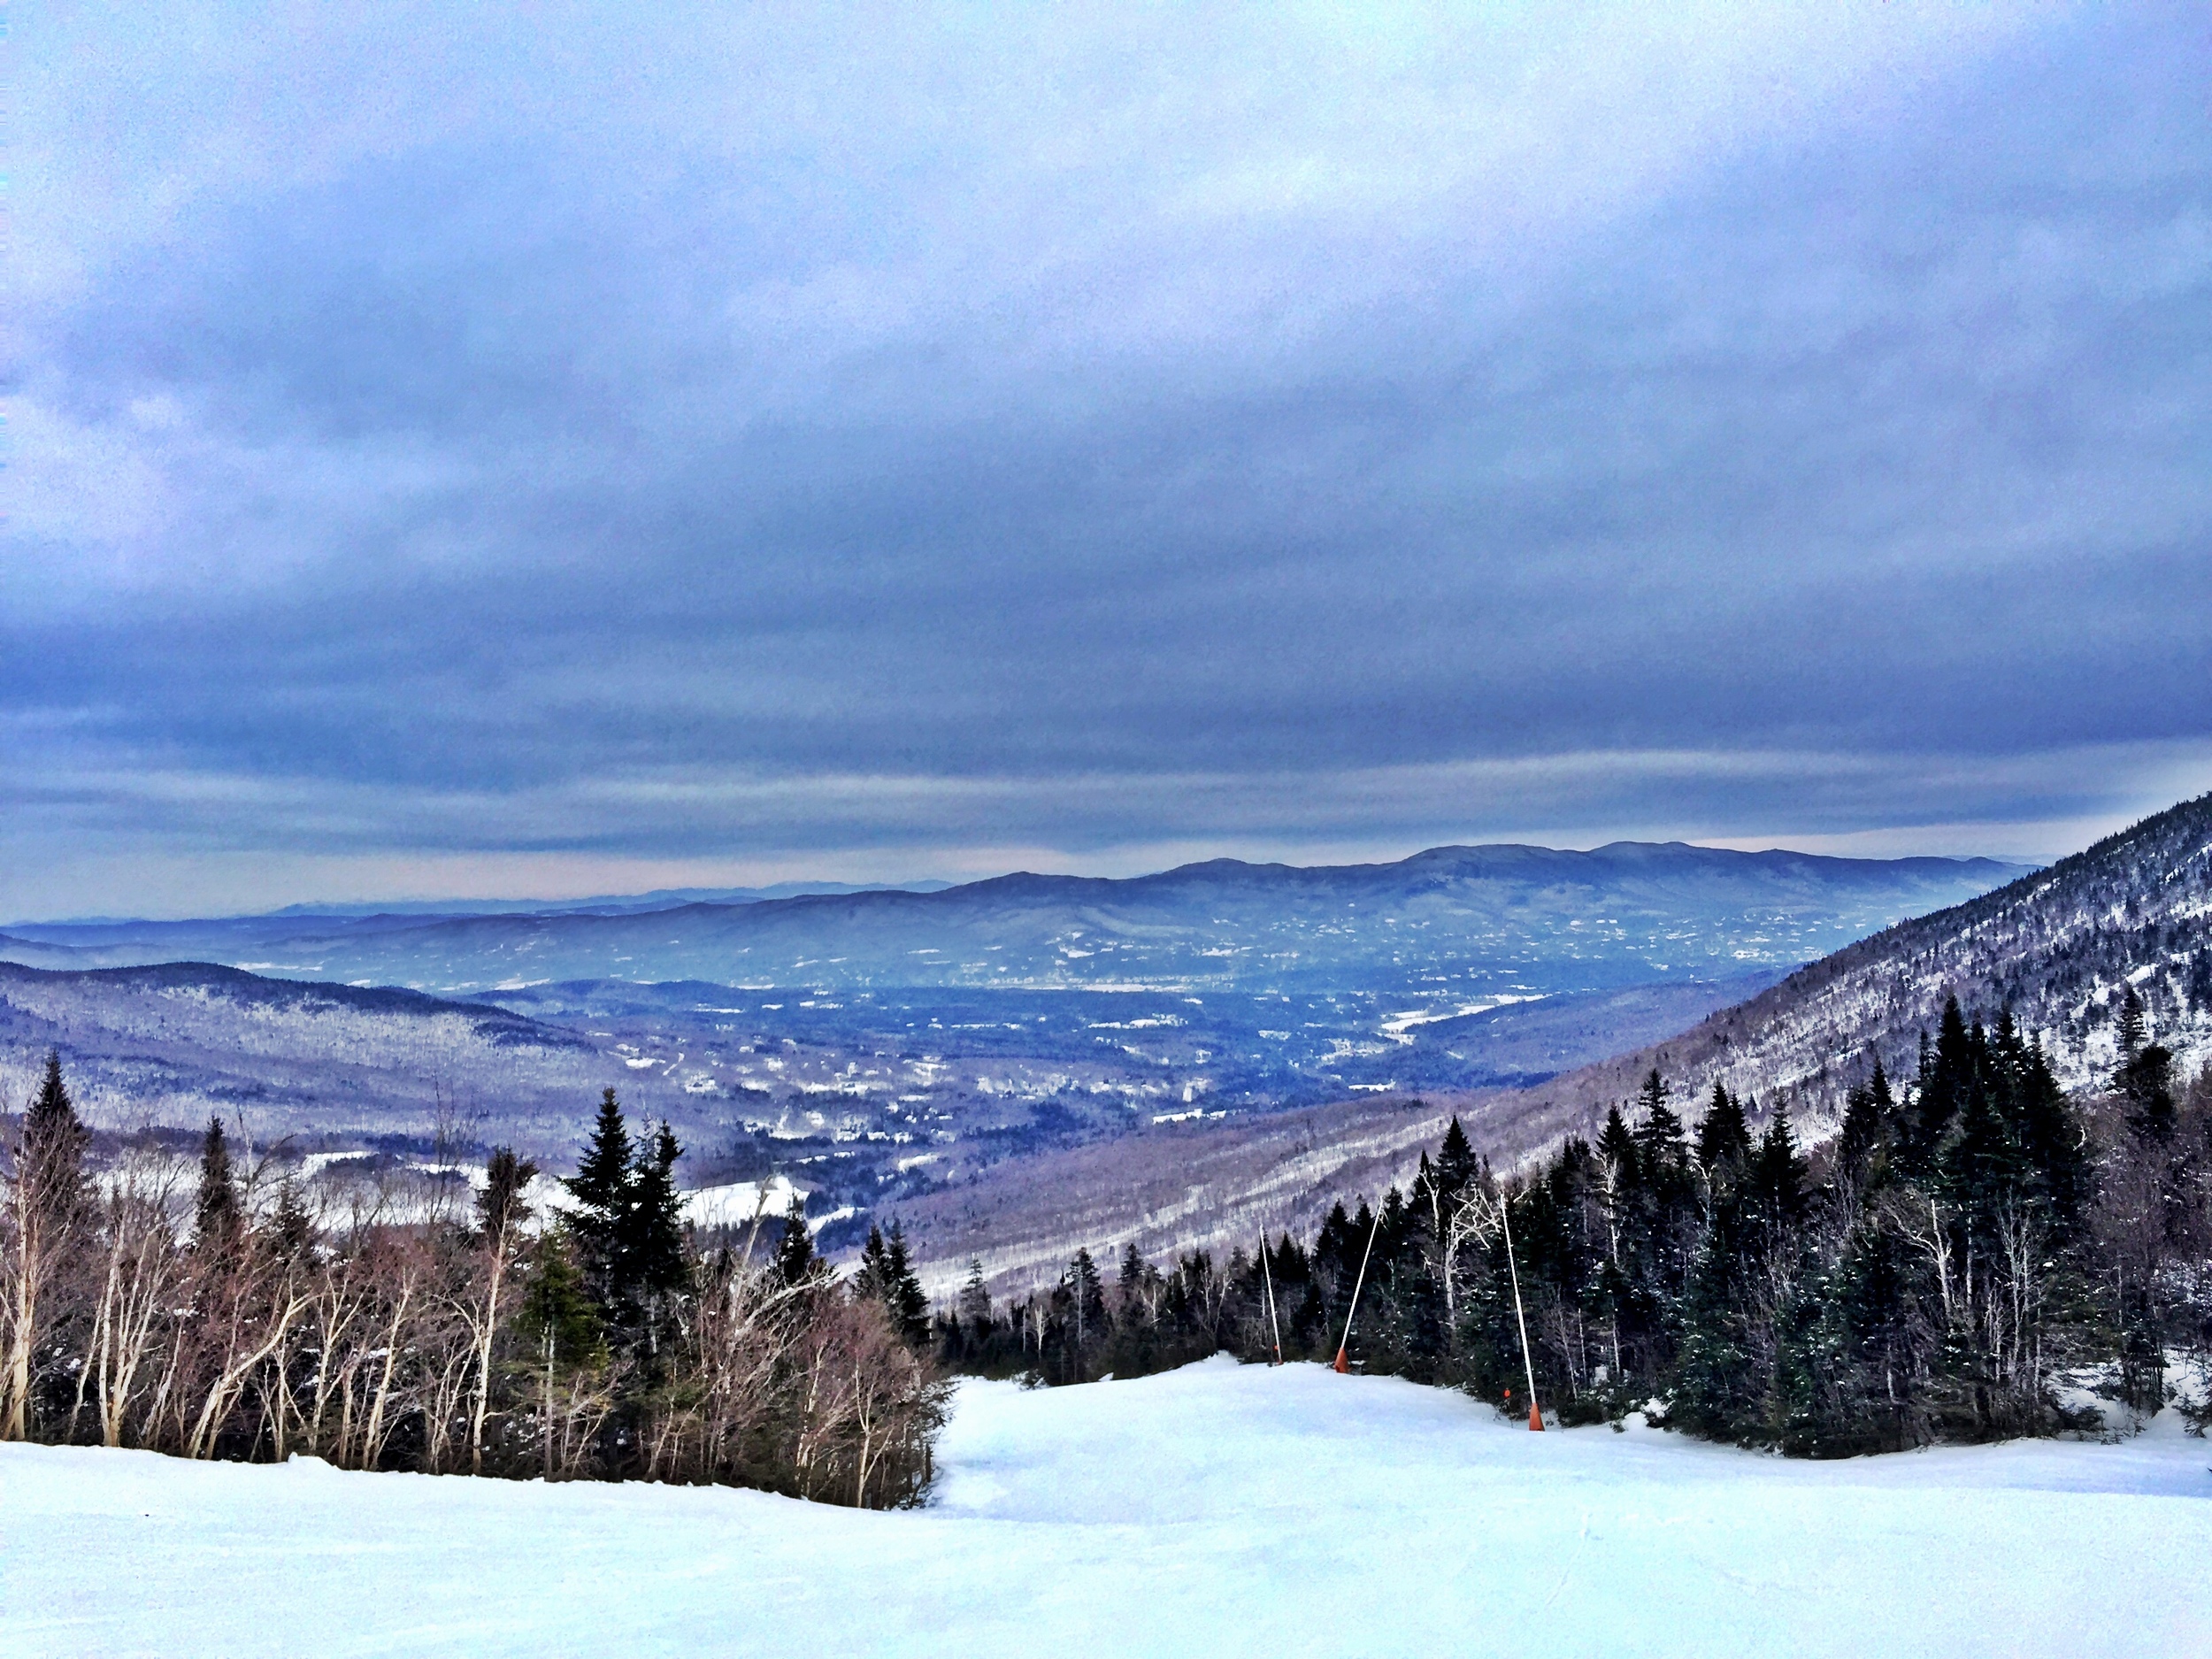 Grungy Slopes, Stowe Vermont, Stowe Mountain Lodge 17.jpg